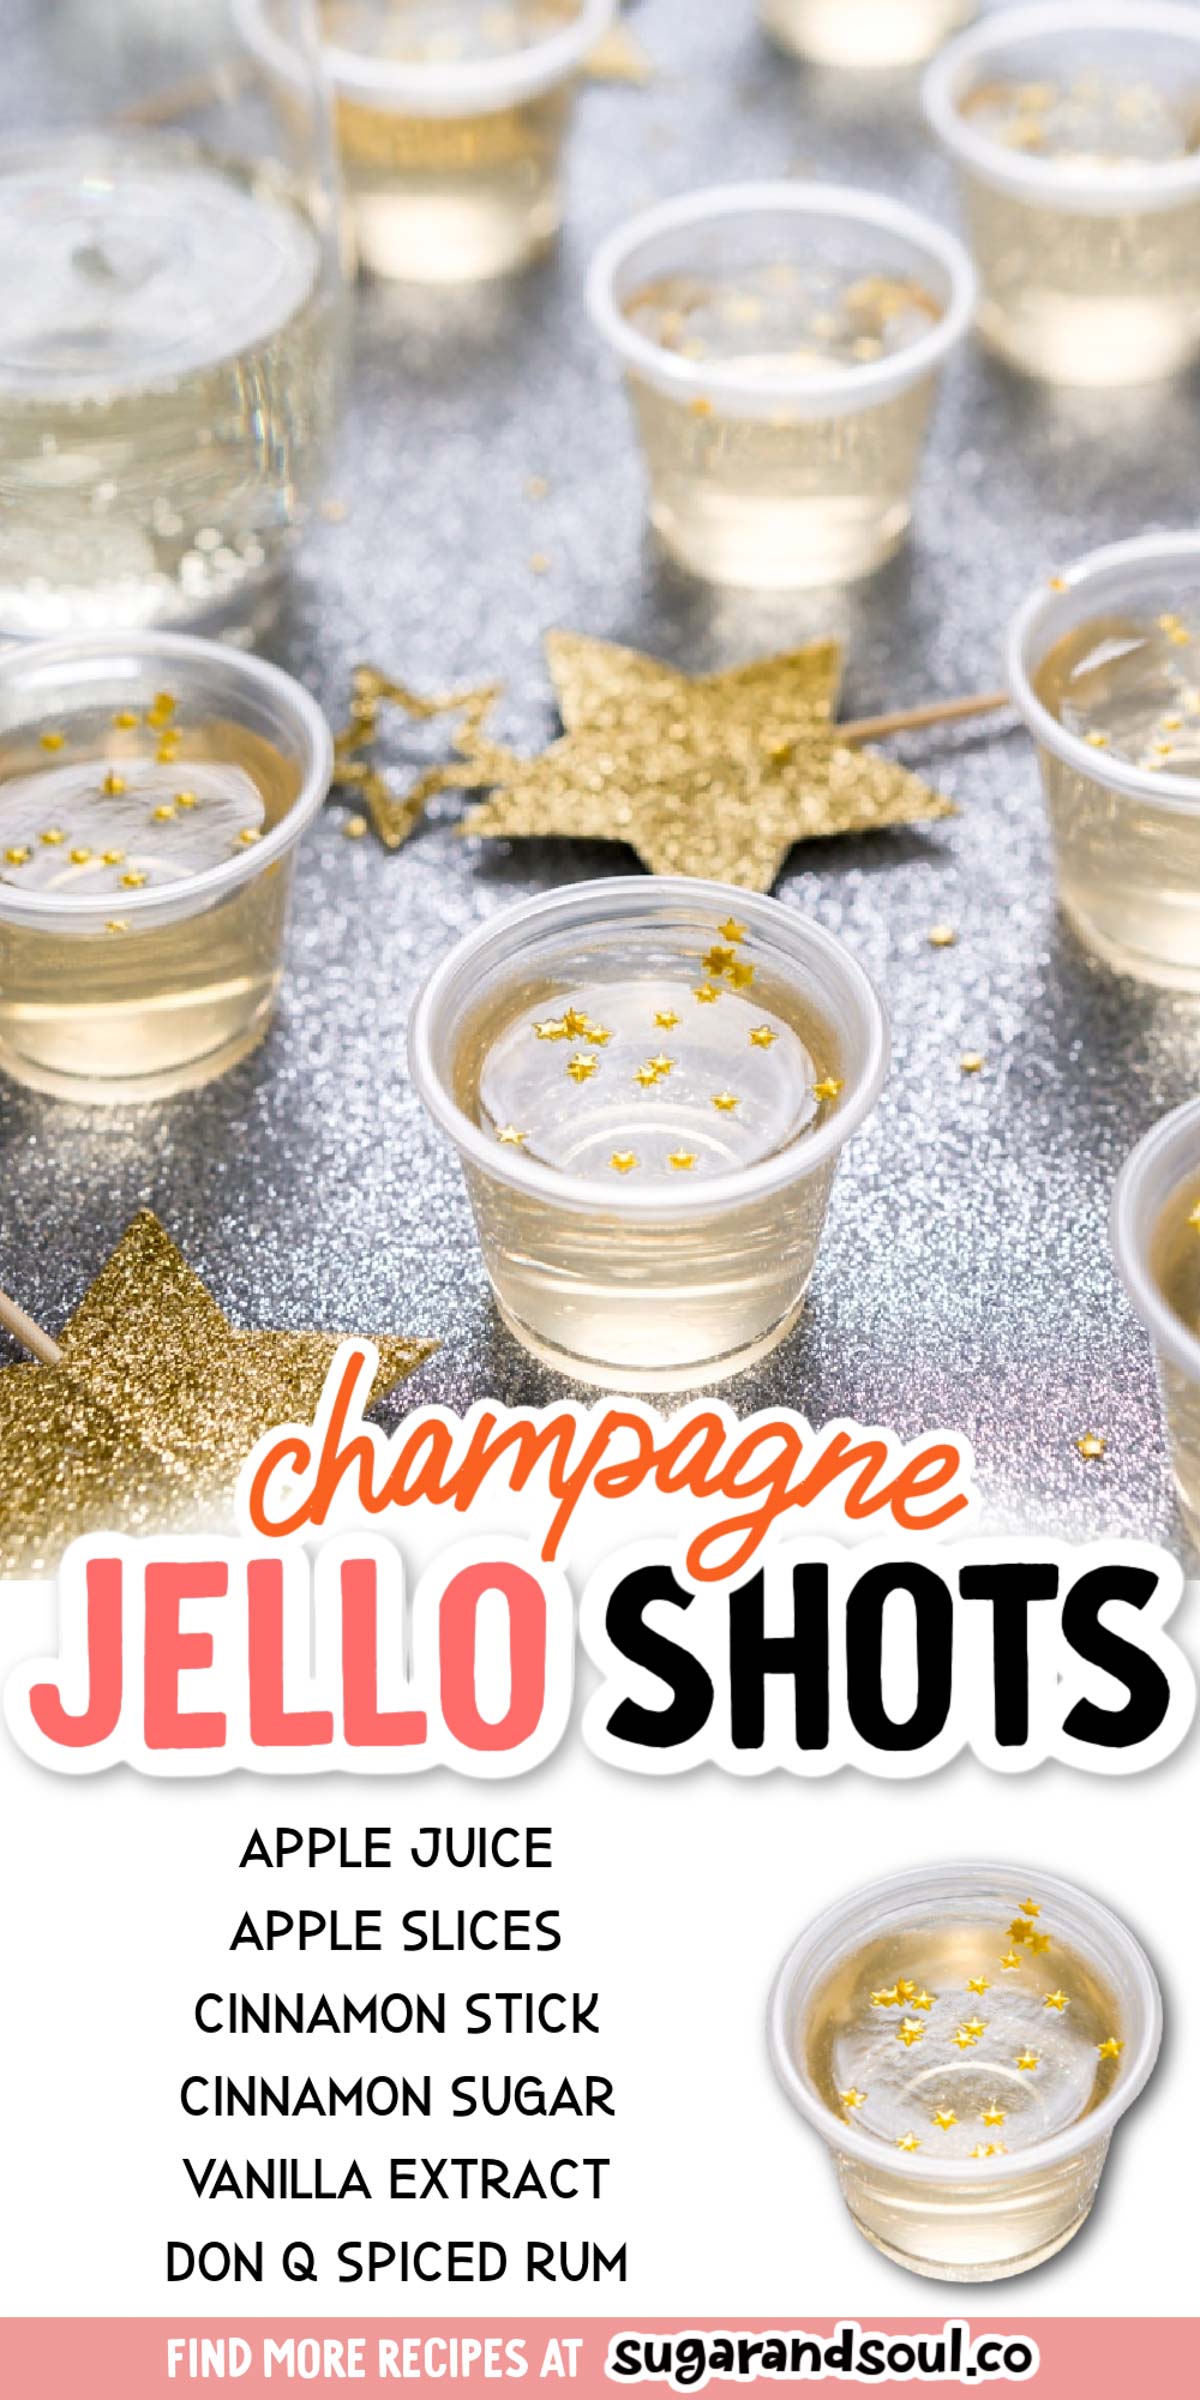 These Champagne Jello Shots are made with champagne, ginger ale, lemon juice, sugar, and gelatin and are so easy to whip up for your New Year's Eve and other celebrations! via @sugarandsoulco